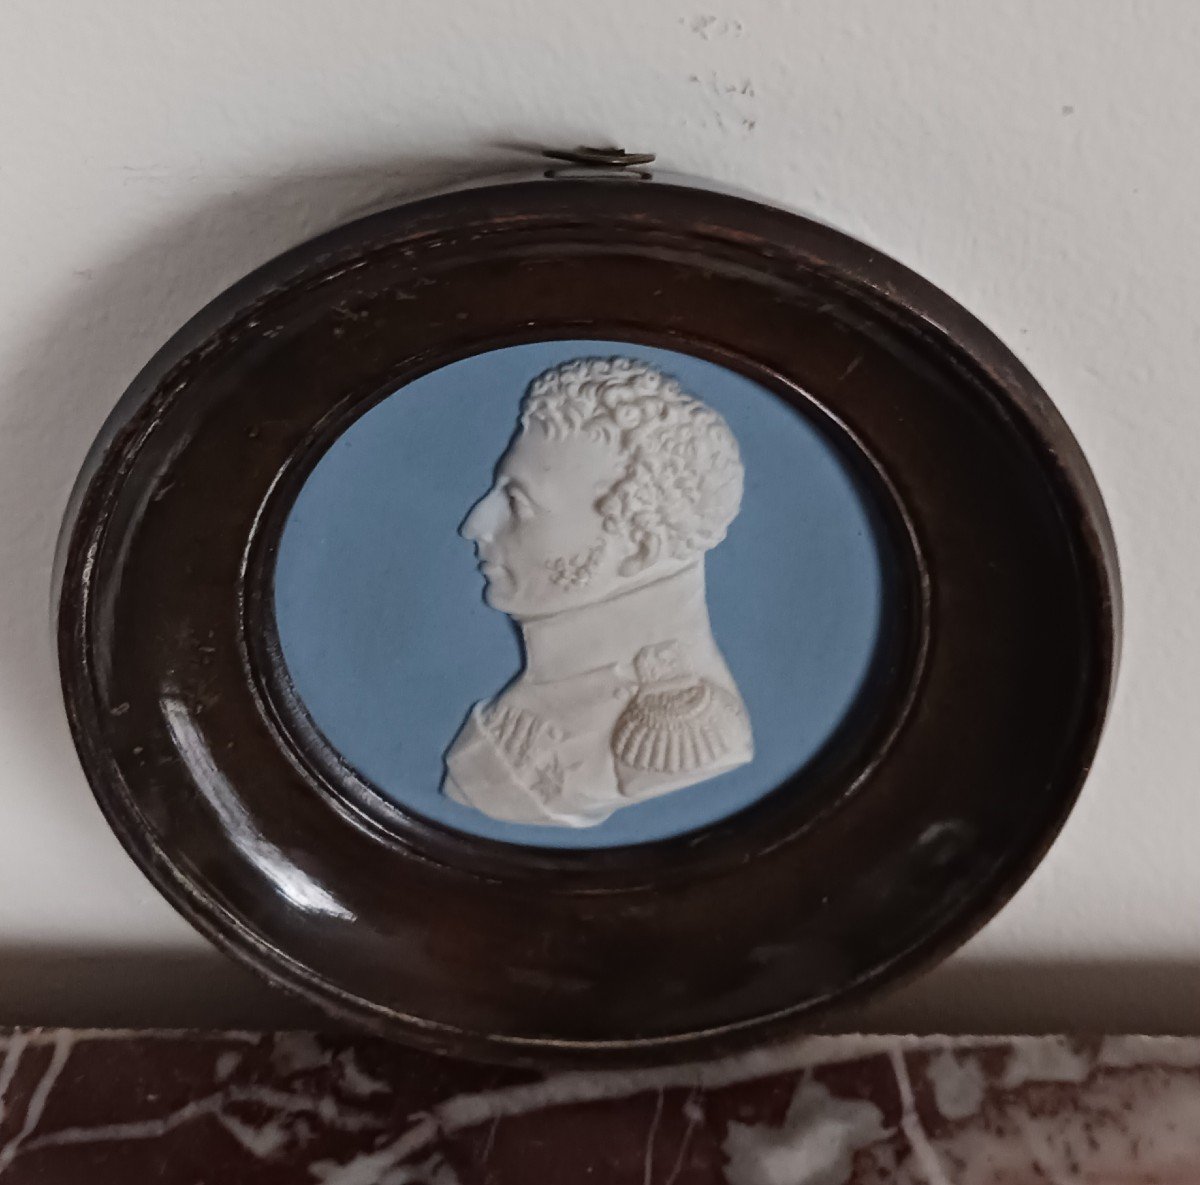 Manufacture Of Sèvres For The Duke Of Doudeauville - Biscuit Medallion With The Profile Of The Duke Of Angoulême-photo-3